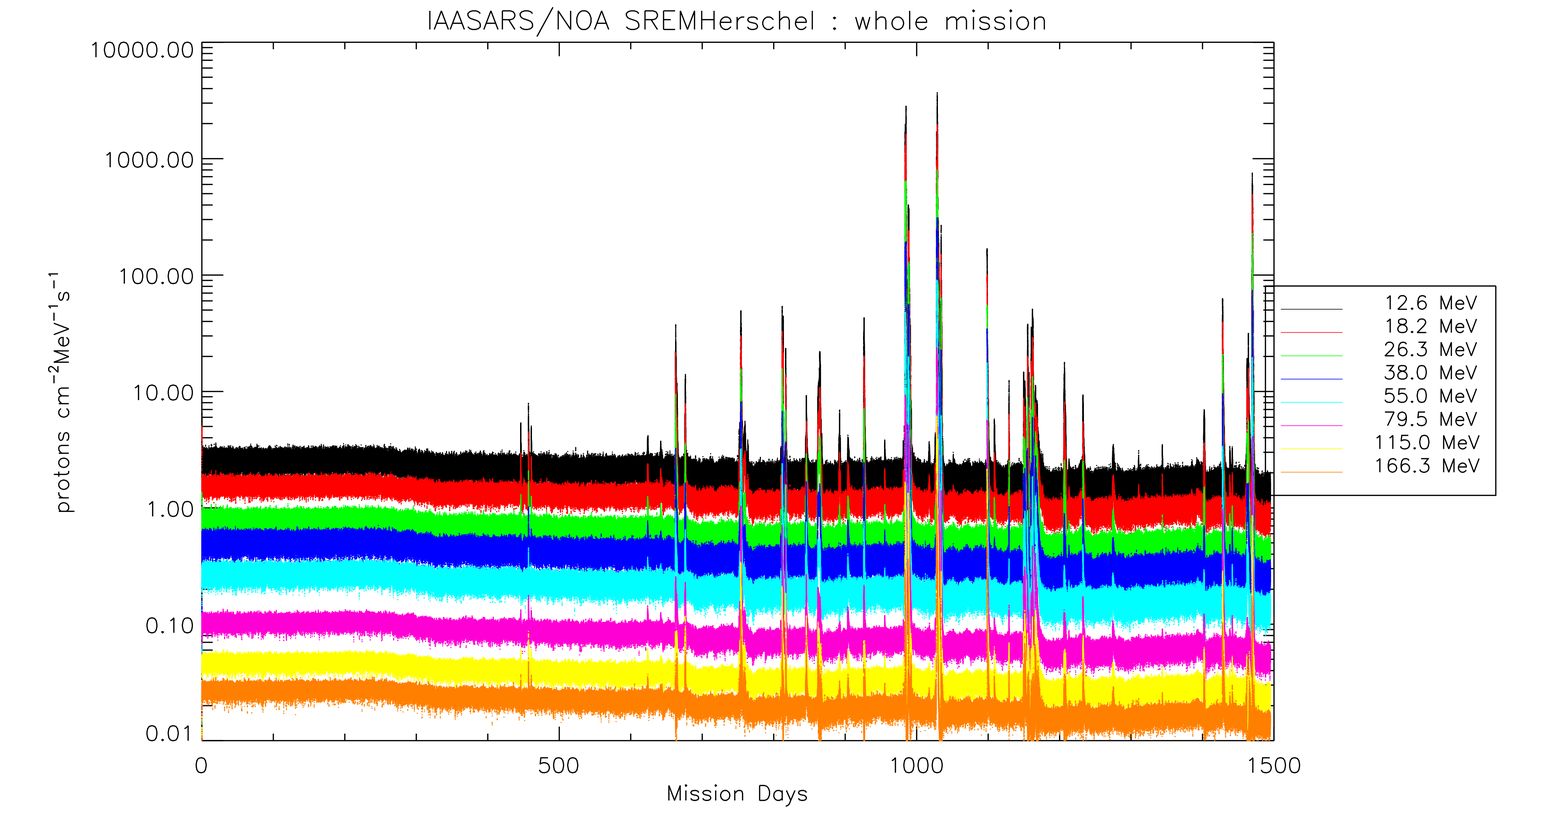 SREM calibrated count rates from the archive of calibrated SREM data http://proteus.space.noa.gr/~srem/herschel/ for the entire mission. There was a higher level of background cosmic ray flux at the start of the mission, corresponding to solar minimum. From early 2010 the cosmic ray flux dropped continuously to the end of mission. There are three very small gaps in the plotted data due to the fact that on three ODs early in the mission, on-board anomalies led to corrupted SREM data. Plot prepared by Ingmar Sandberg on behalf of the SREM Team.